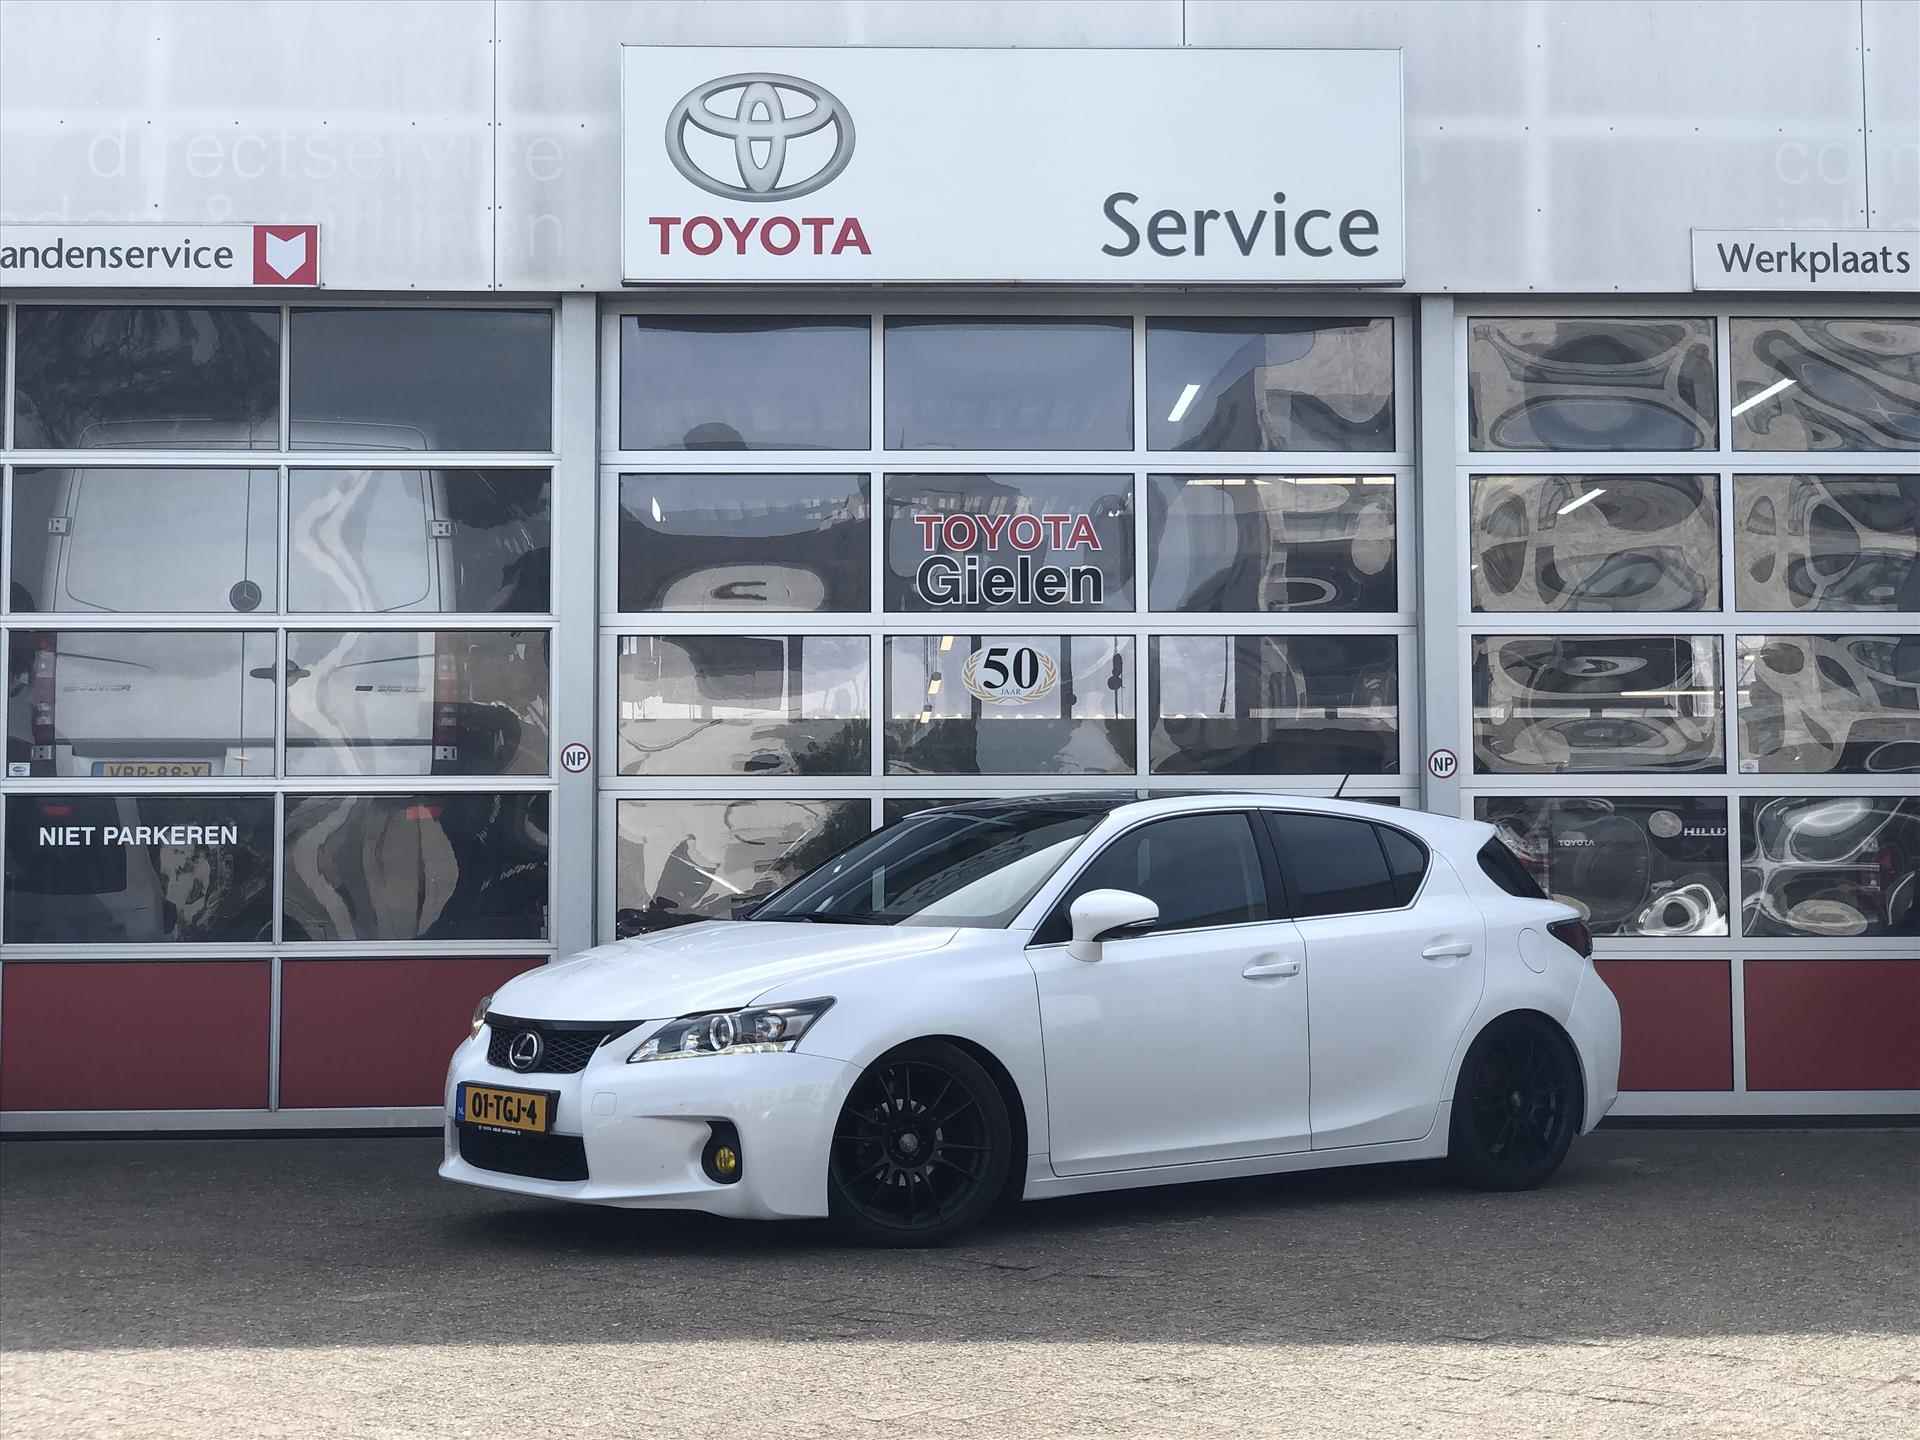 Lexus Ct 200h Business Line Pro F Sport Grill | Parkeercamera, Keyless, Cruise control, 18 inch, Privacy Glass, Zeer compleet! - 2/39